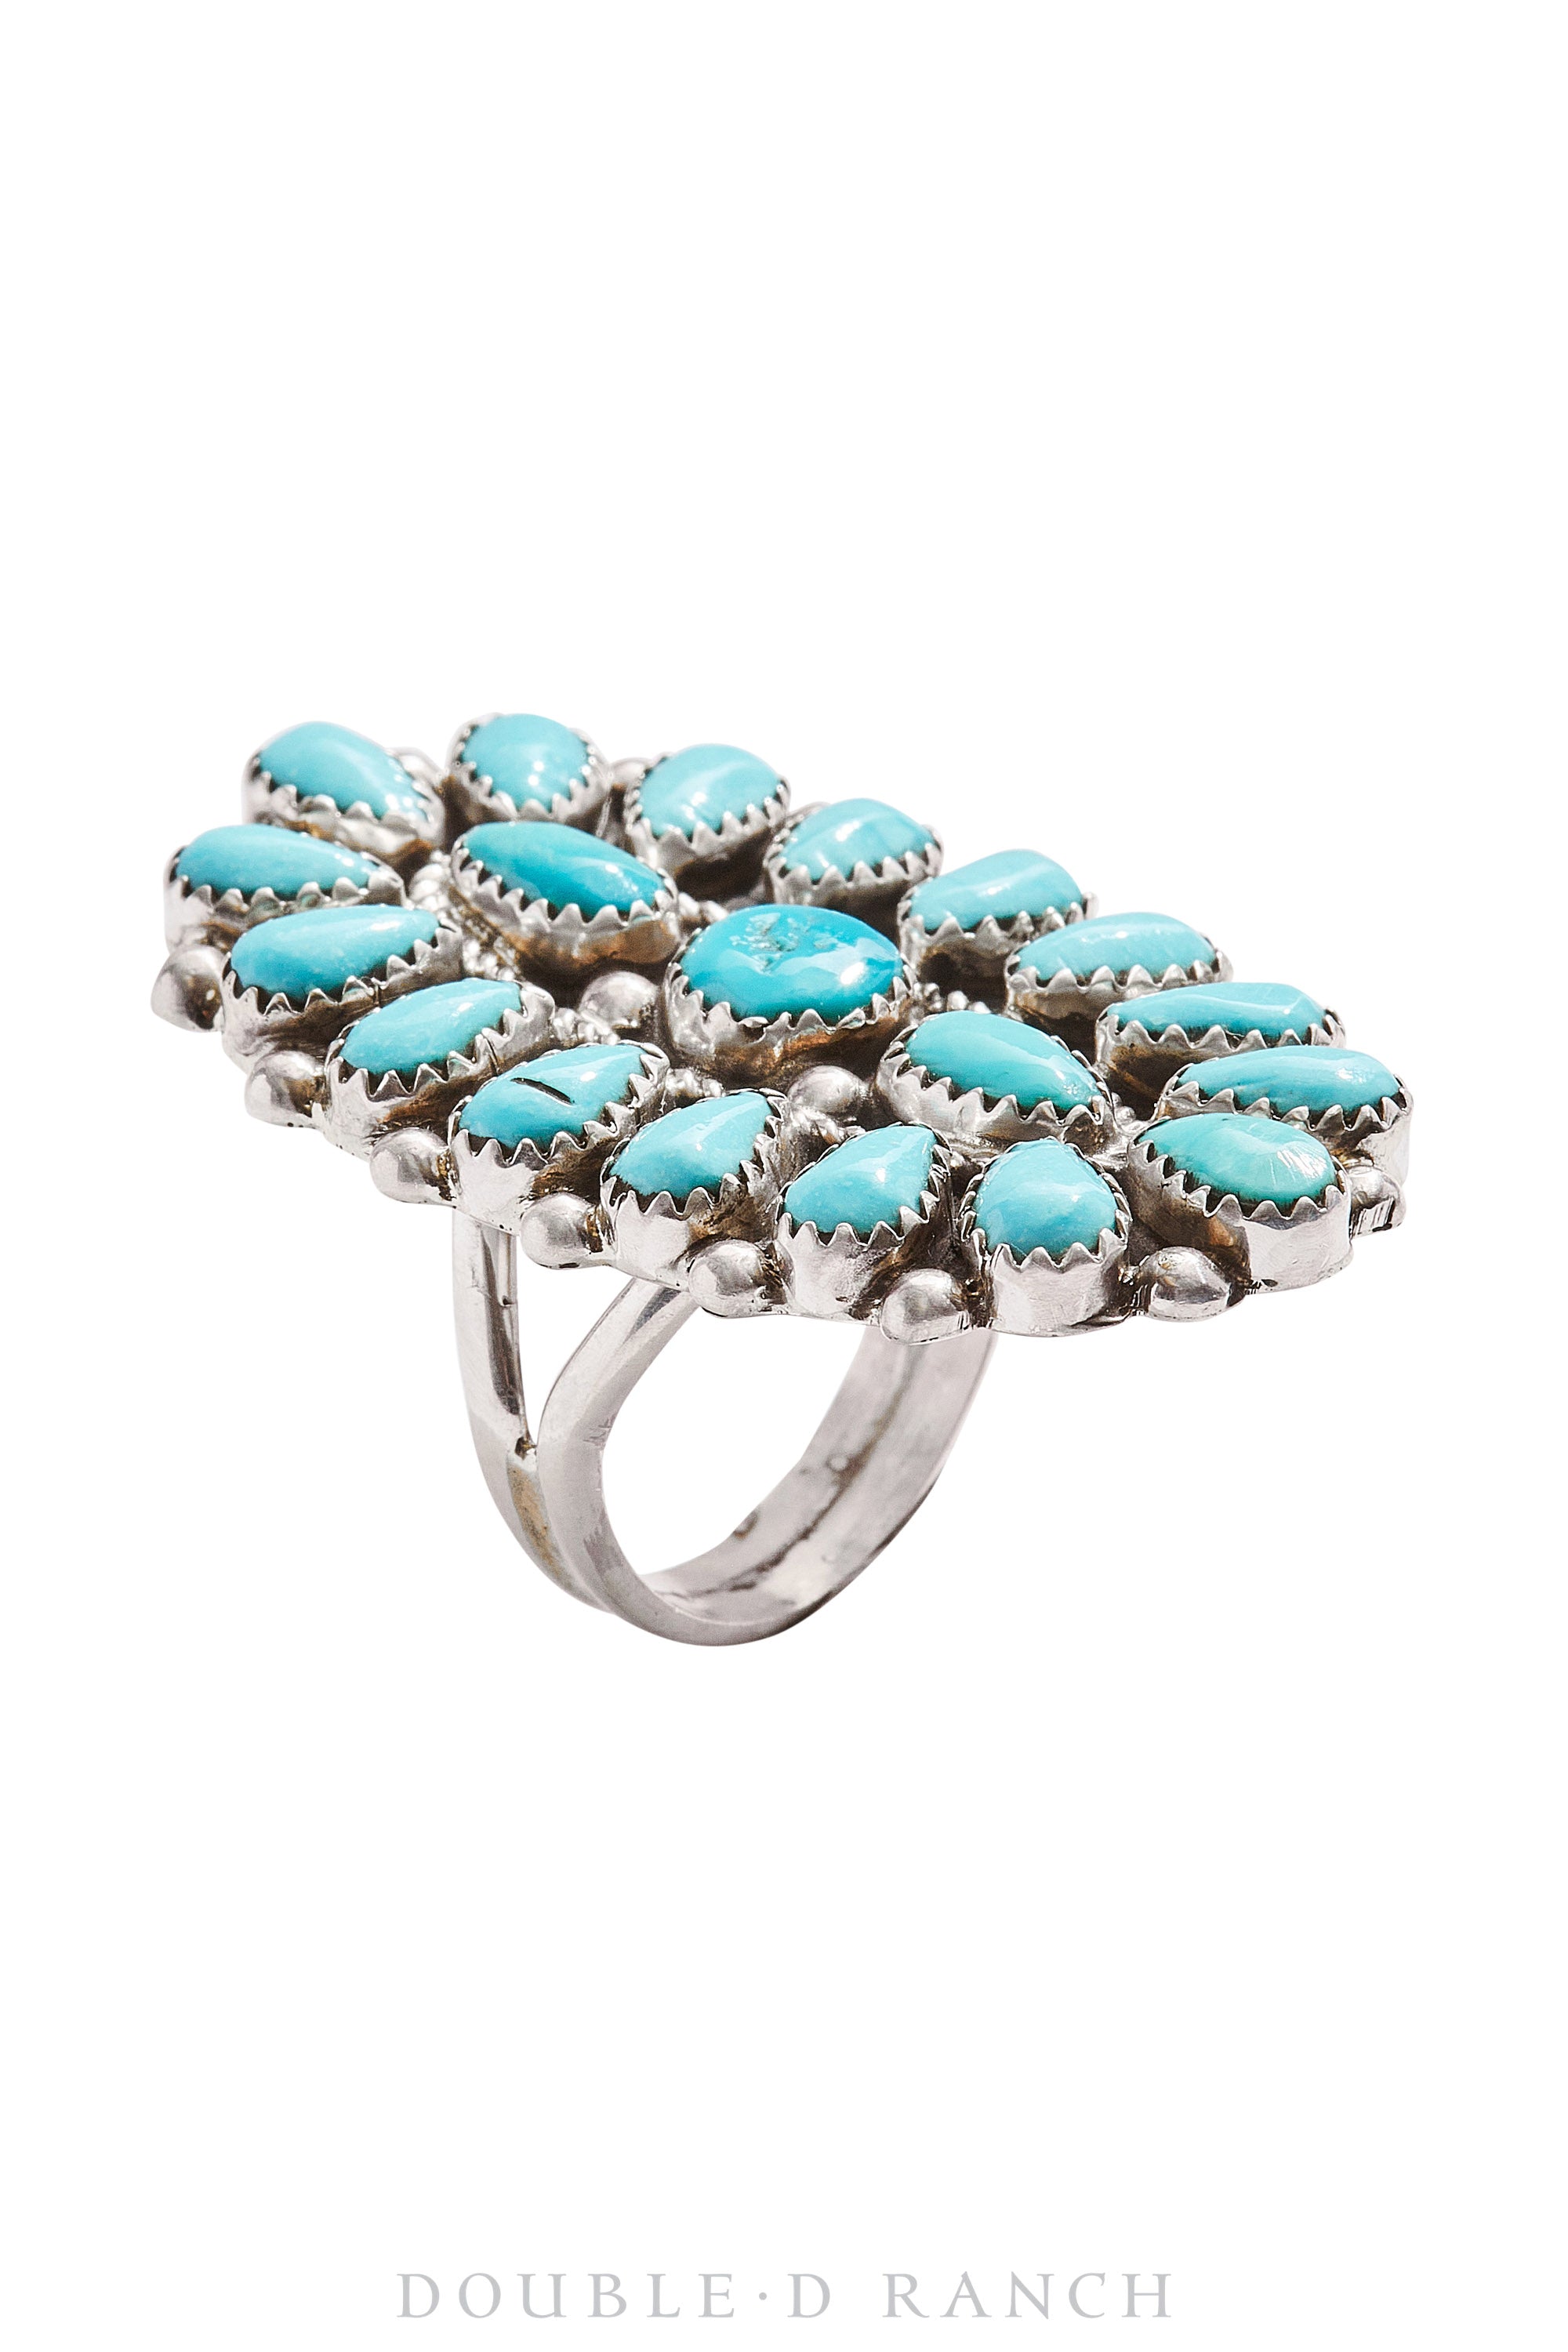 Ring, Cluster, Turquoise, Contemporary, 1167